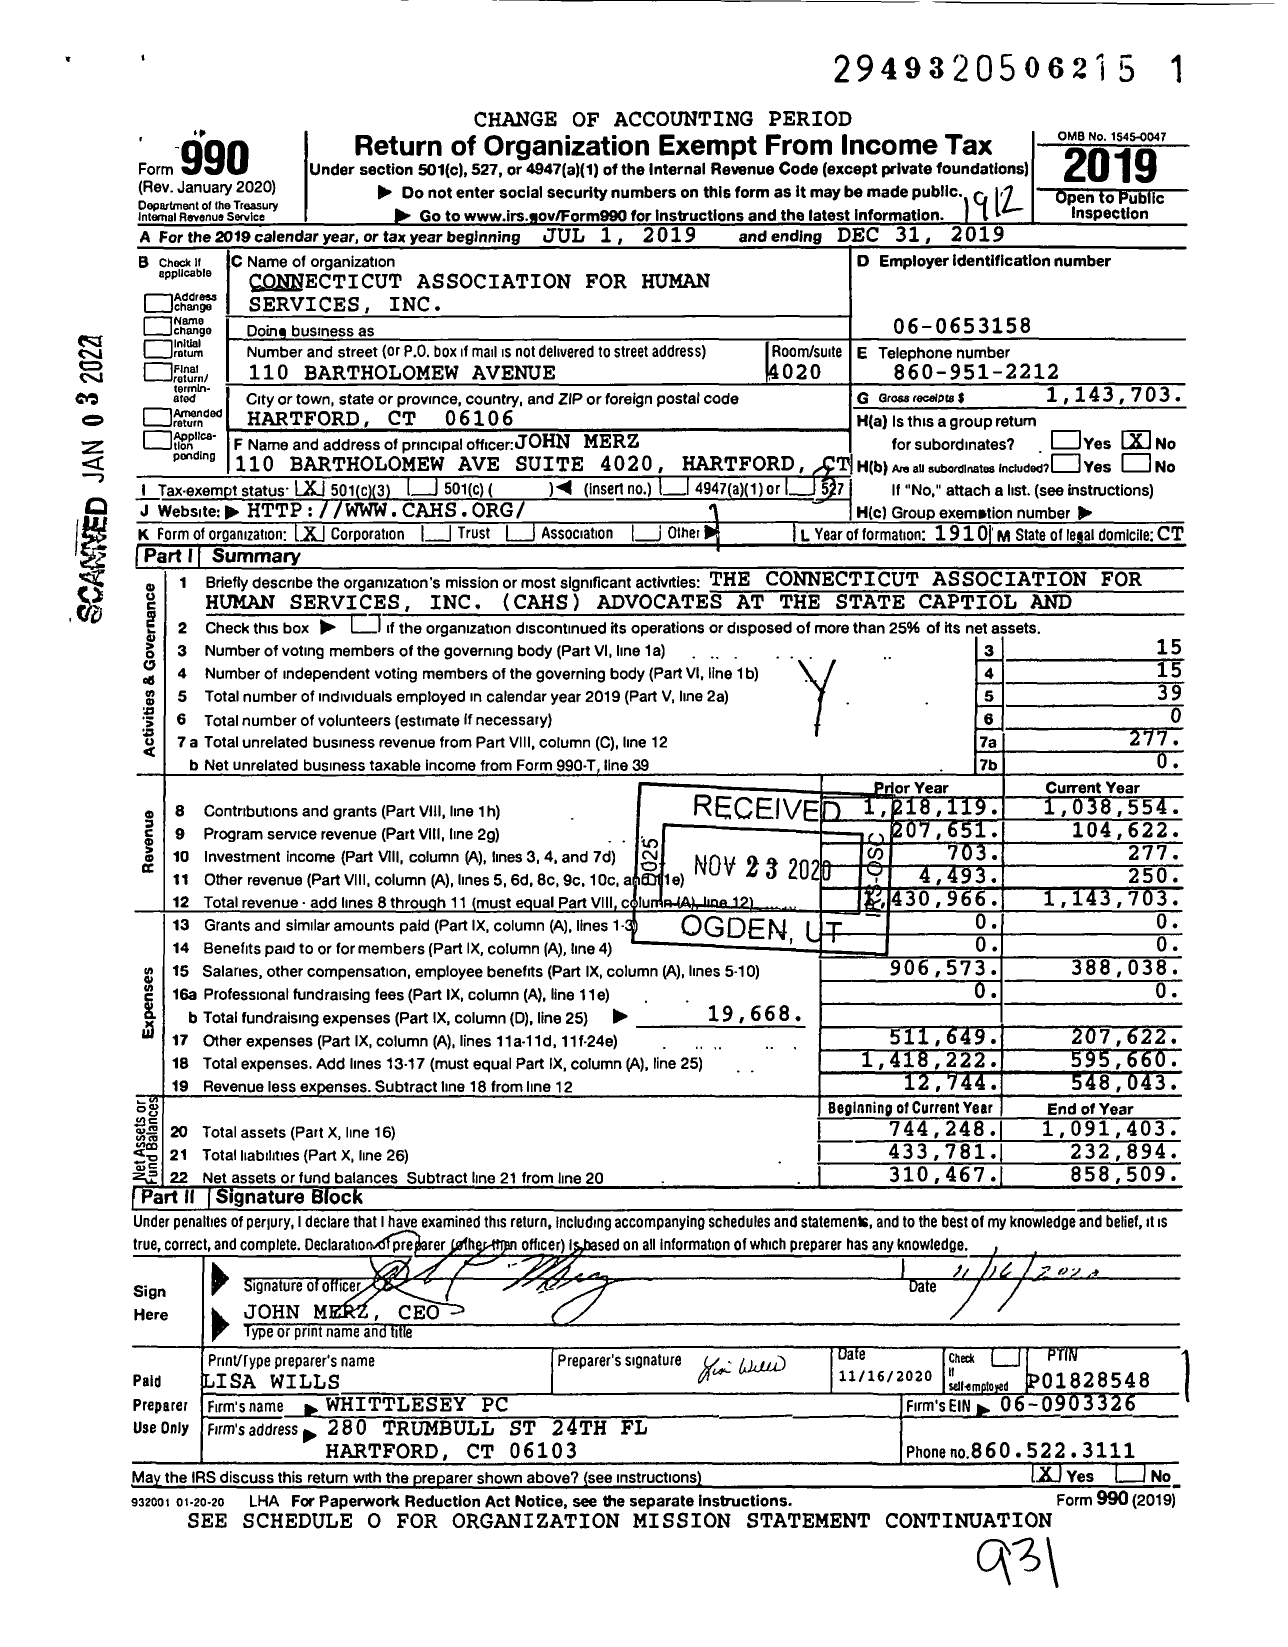 Image of first page of 2019 Form 990 for Connecticut Association for Human Services